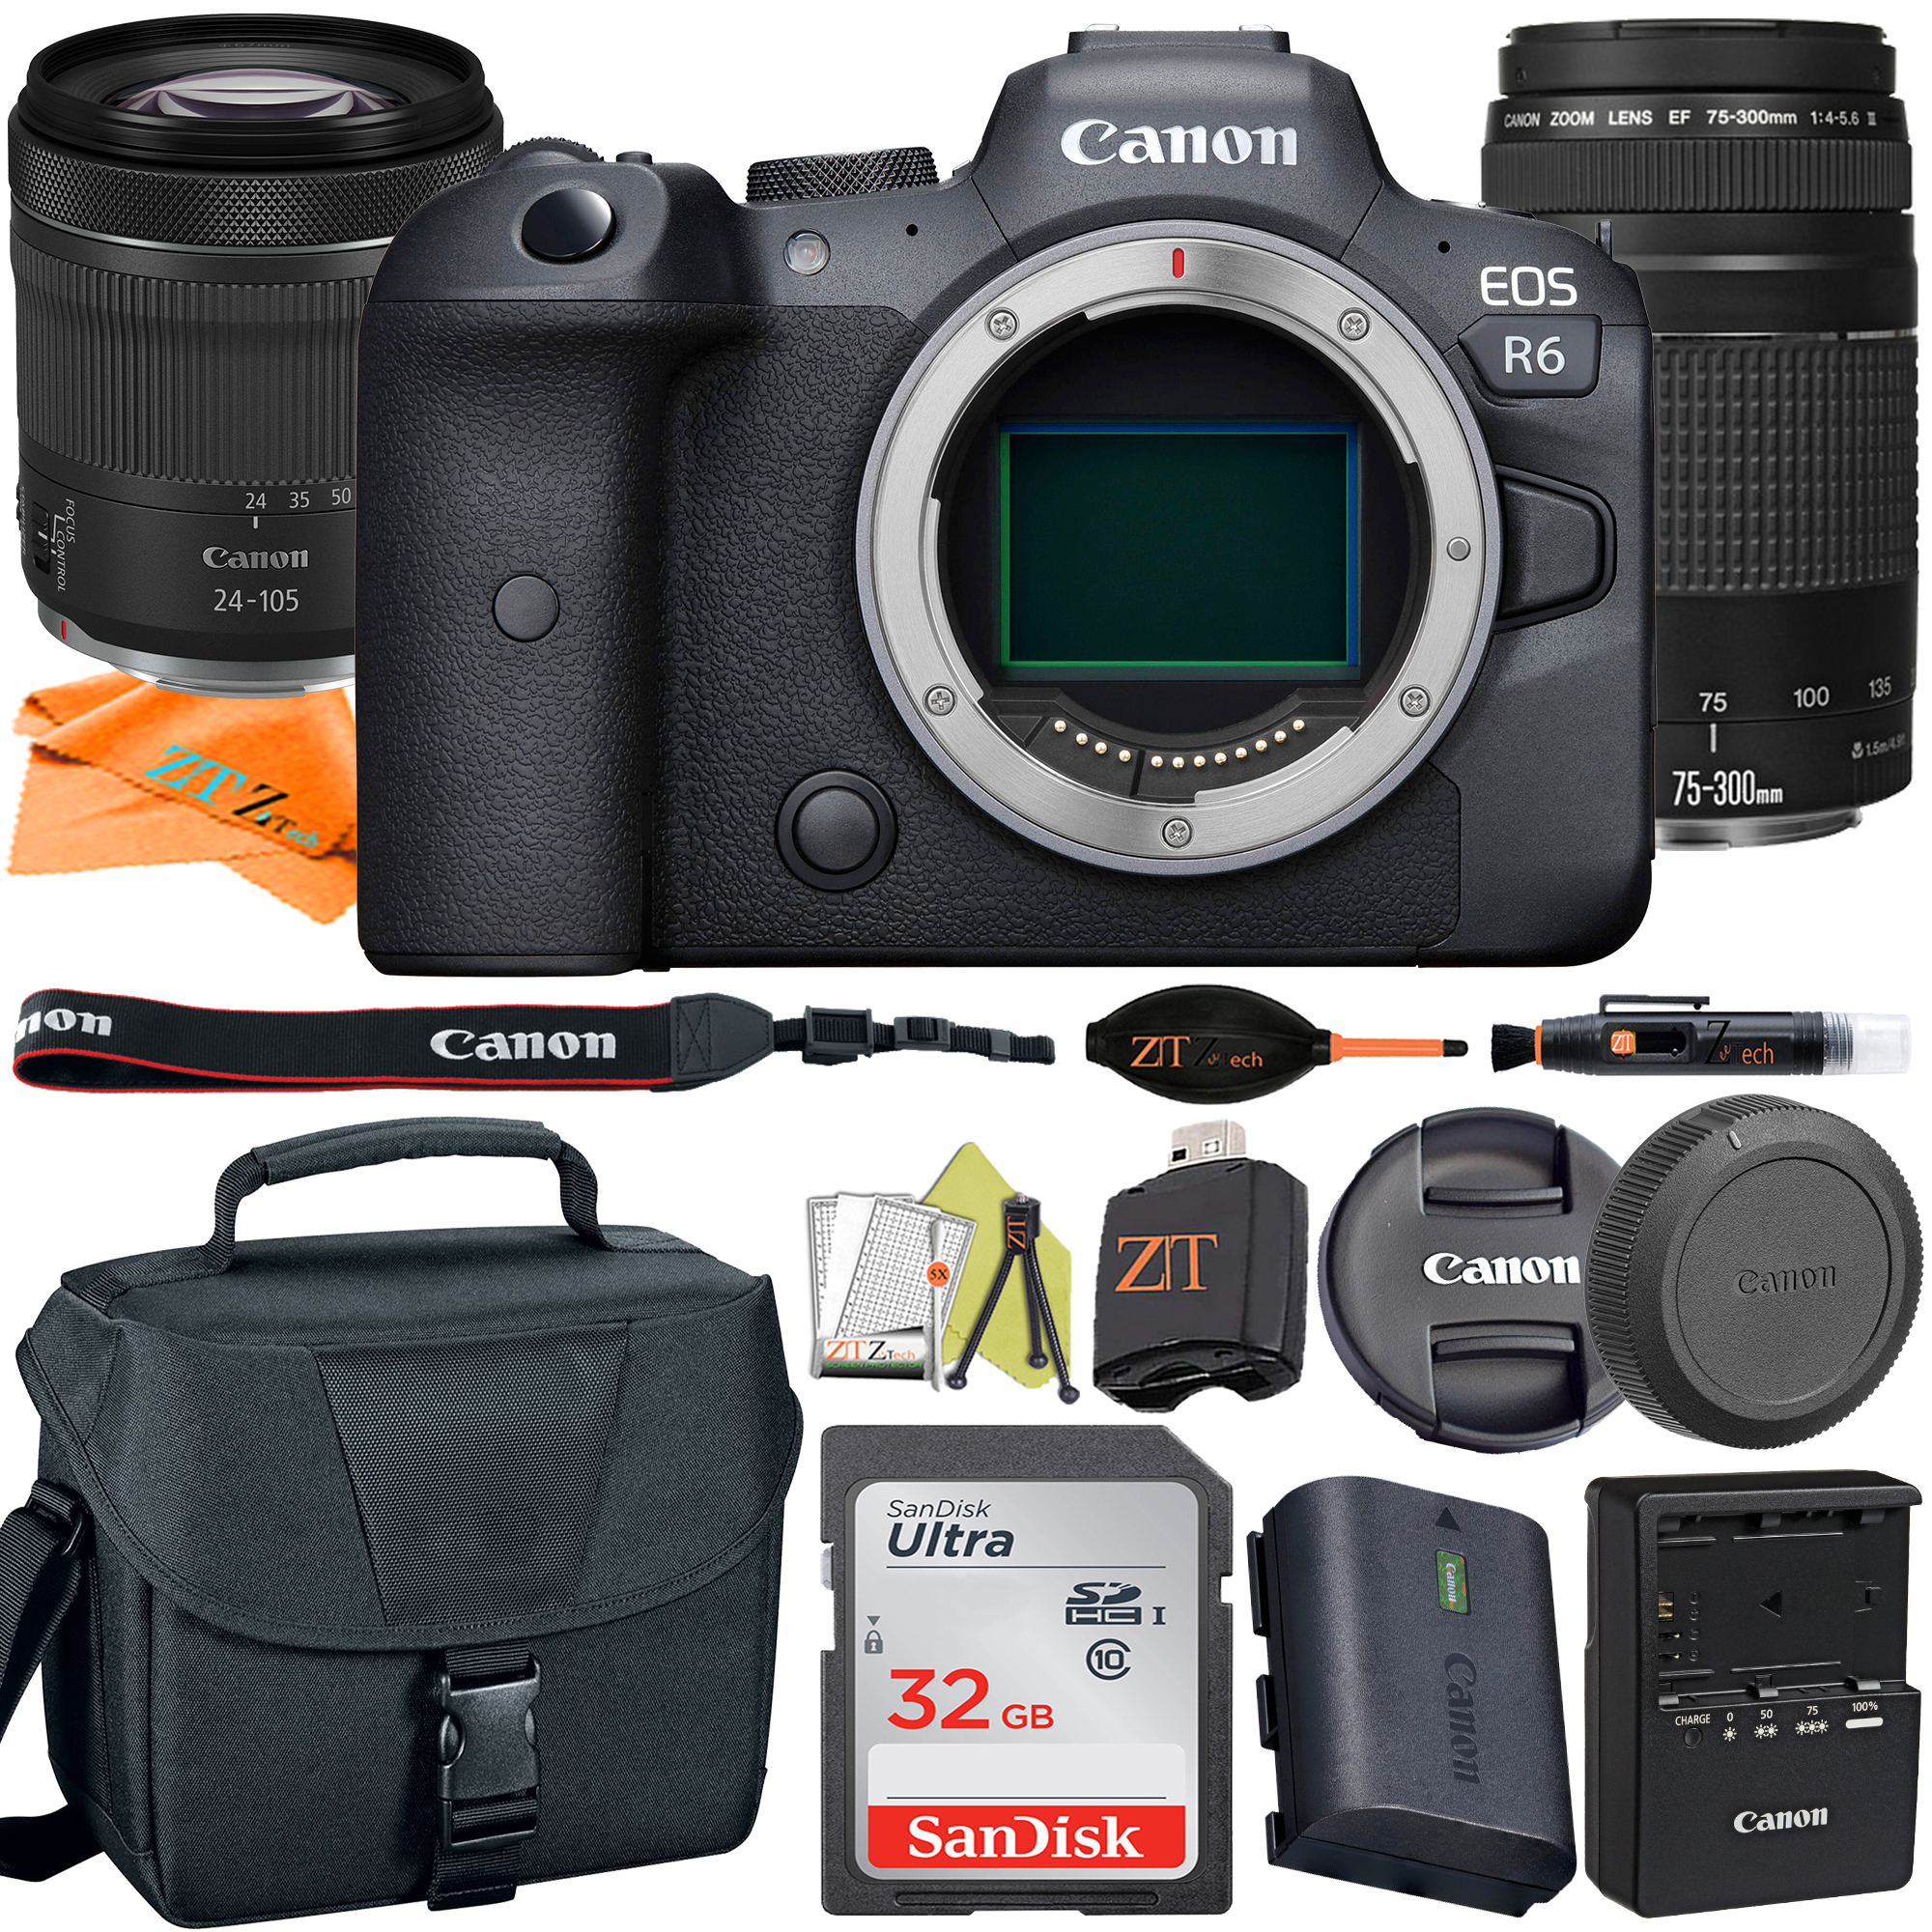 Canon EOS R6 Mirrorless Digital Camera with RF 24-105mm STM + 75-300mm Lens + SanDisk 32GB Card + Case + ZeeTech Accessory